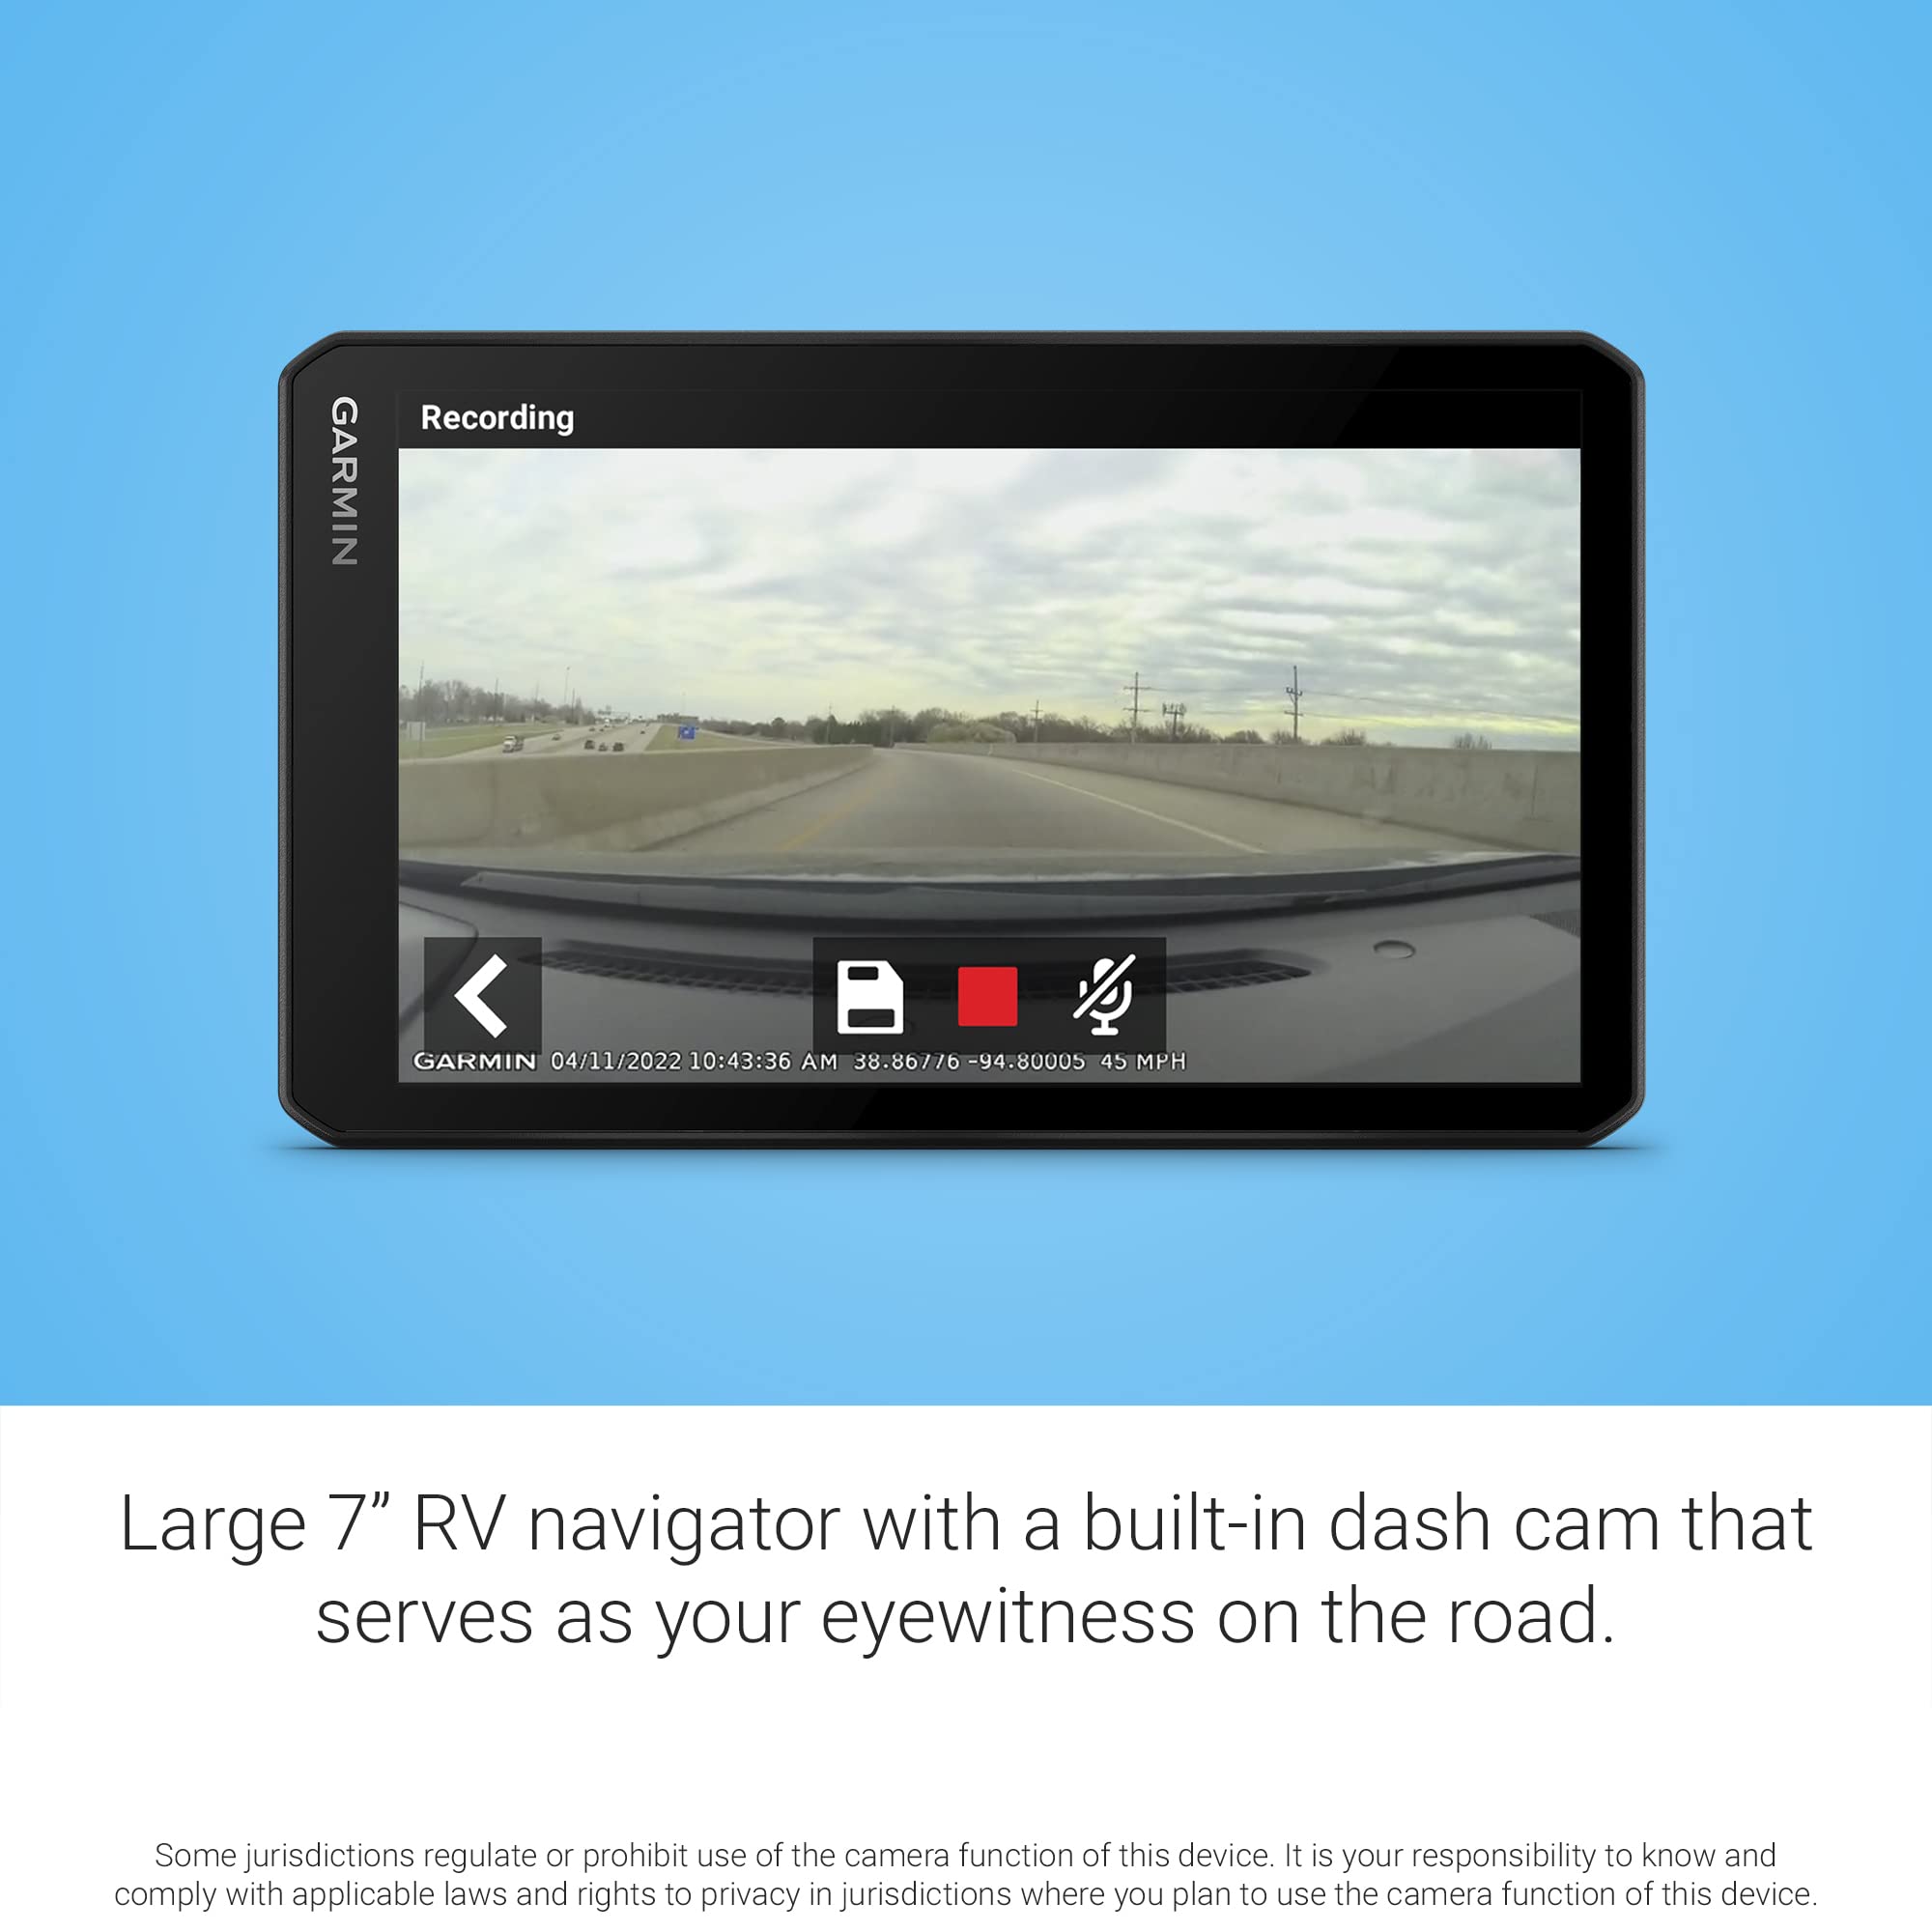 Garmin RV Cam 795, Large, Easy-to-Read 7” GPS RV Navigator, Built-in Dash Cam, Automatic Incident Detection, Custom RV Routing, High-Resolution Birdseye Satellite Imagery